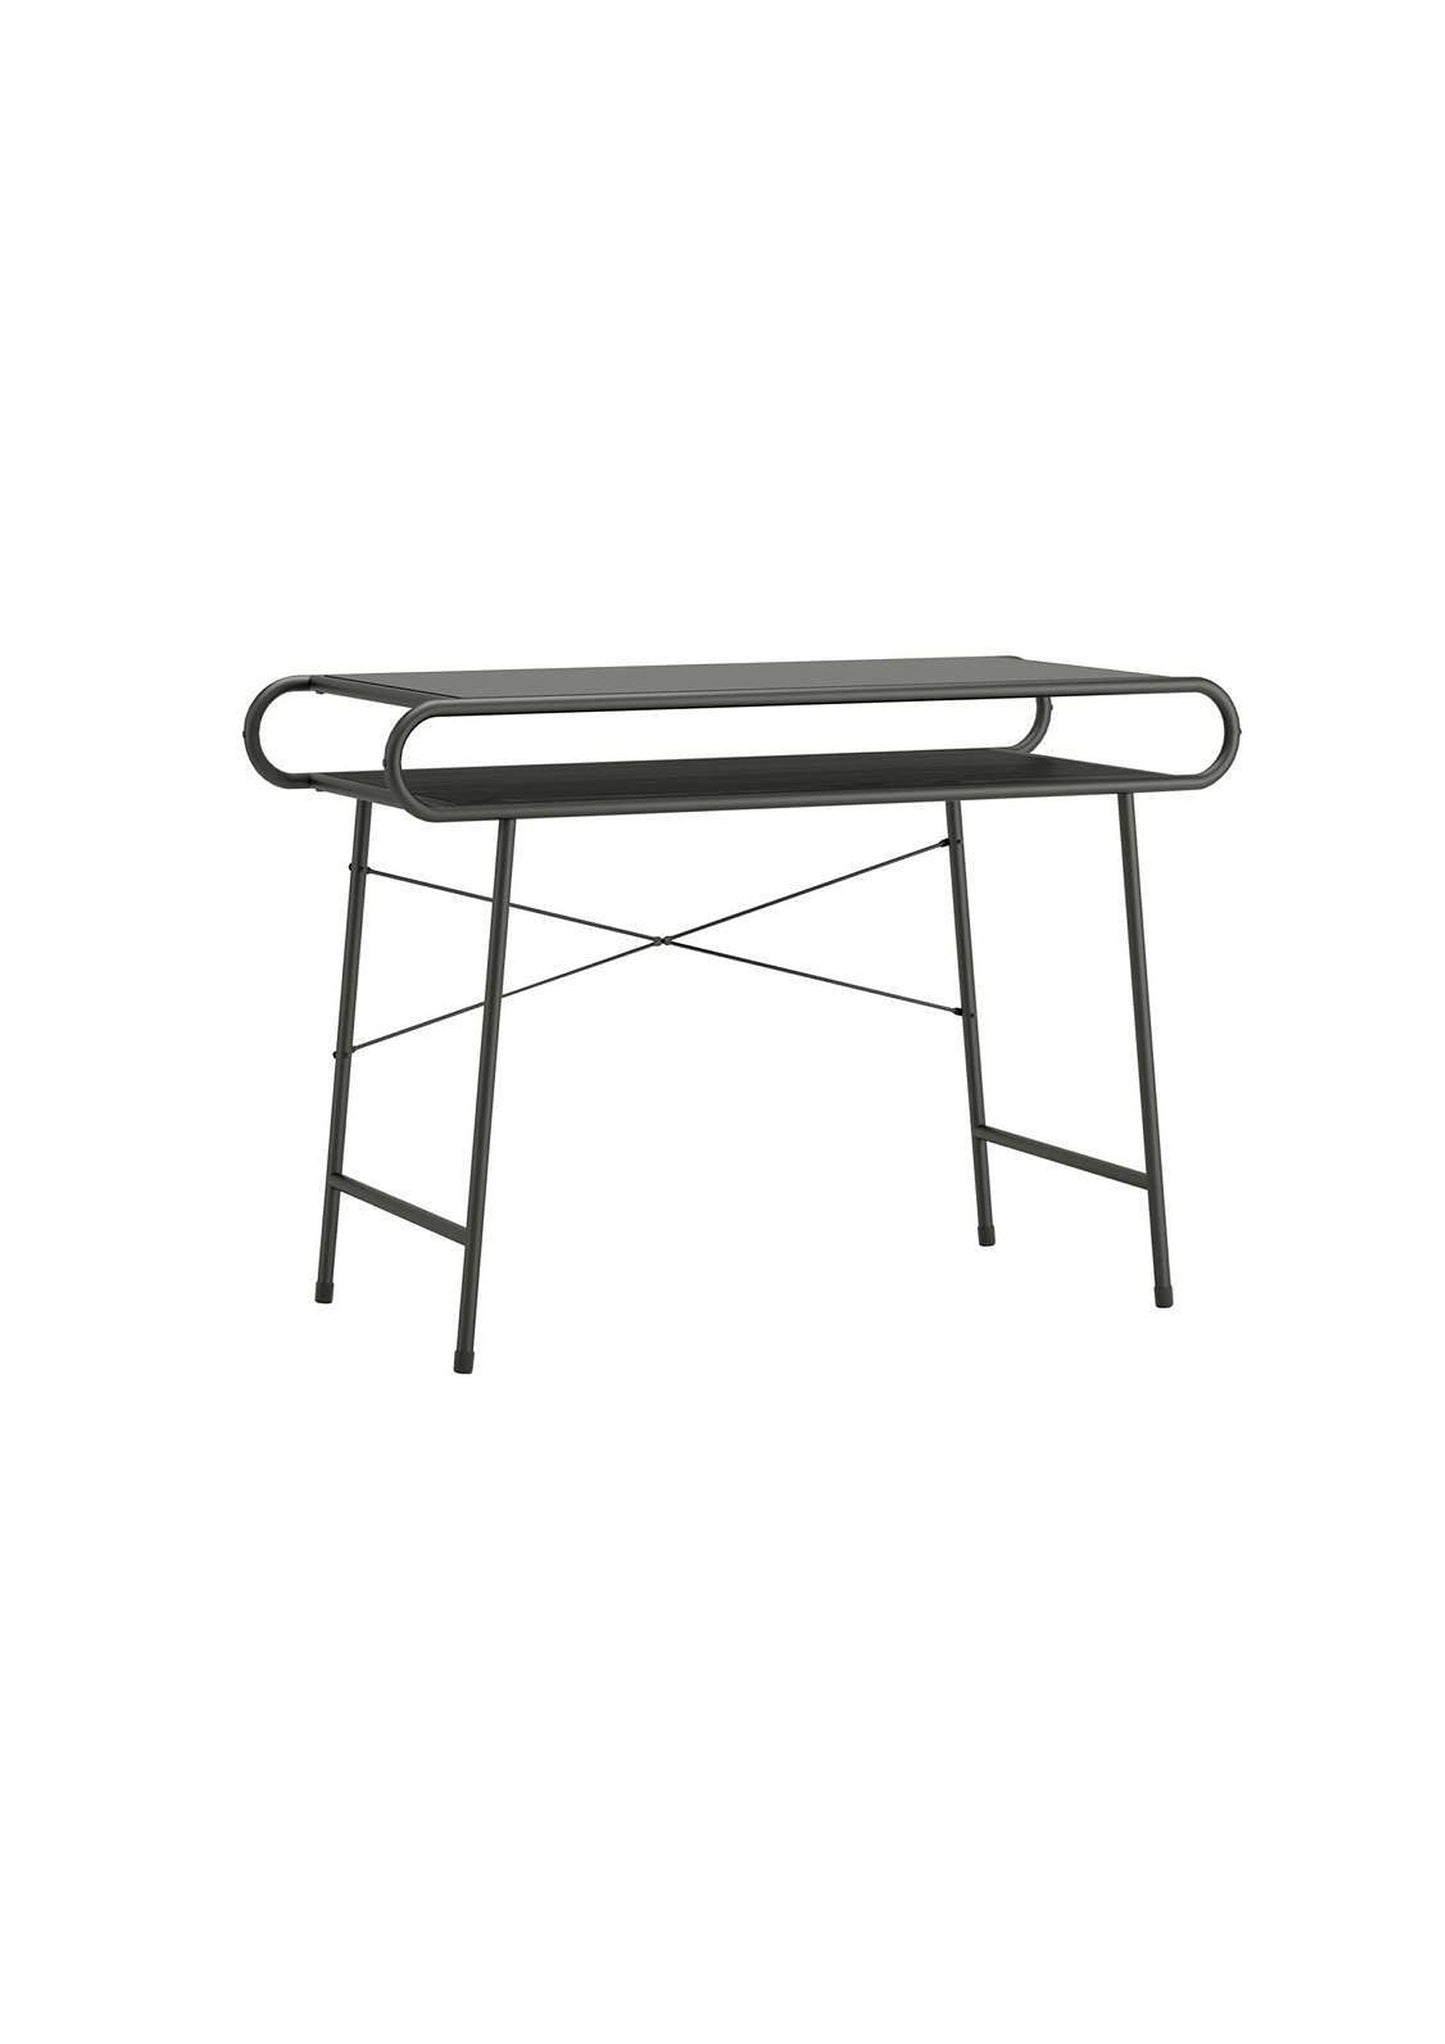 Retro Metal Home office desk with safety-tempered black glass and Misted Elm finish